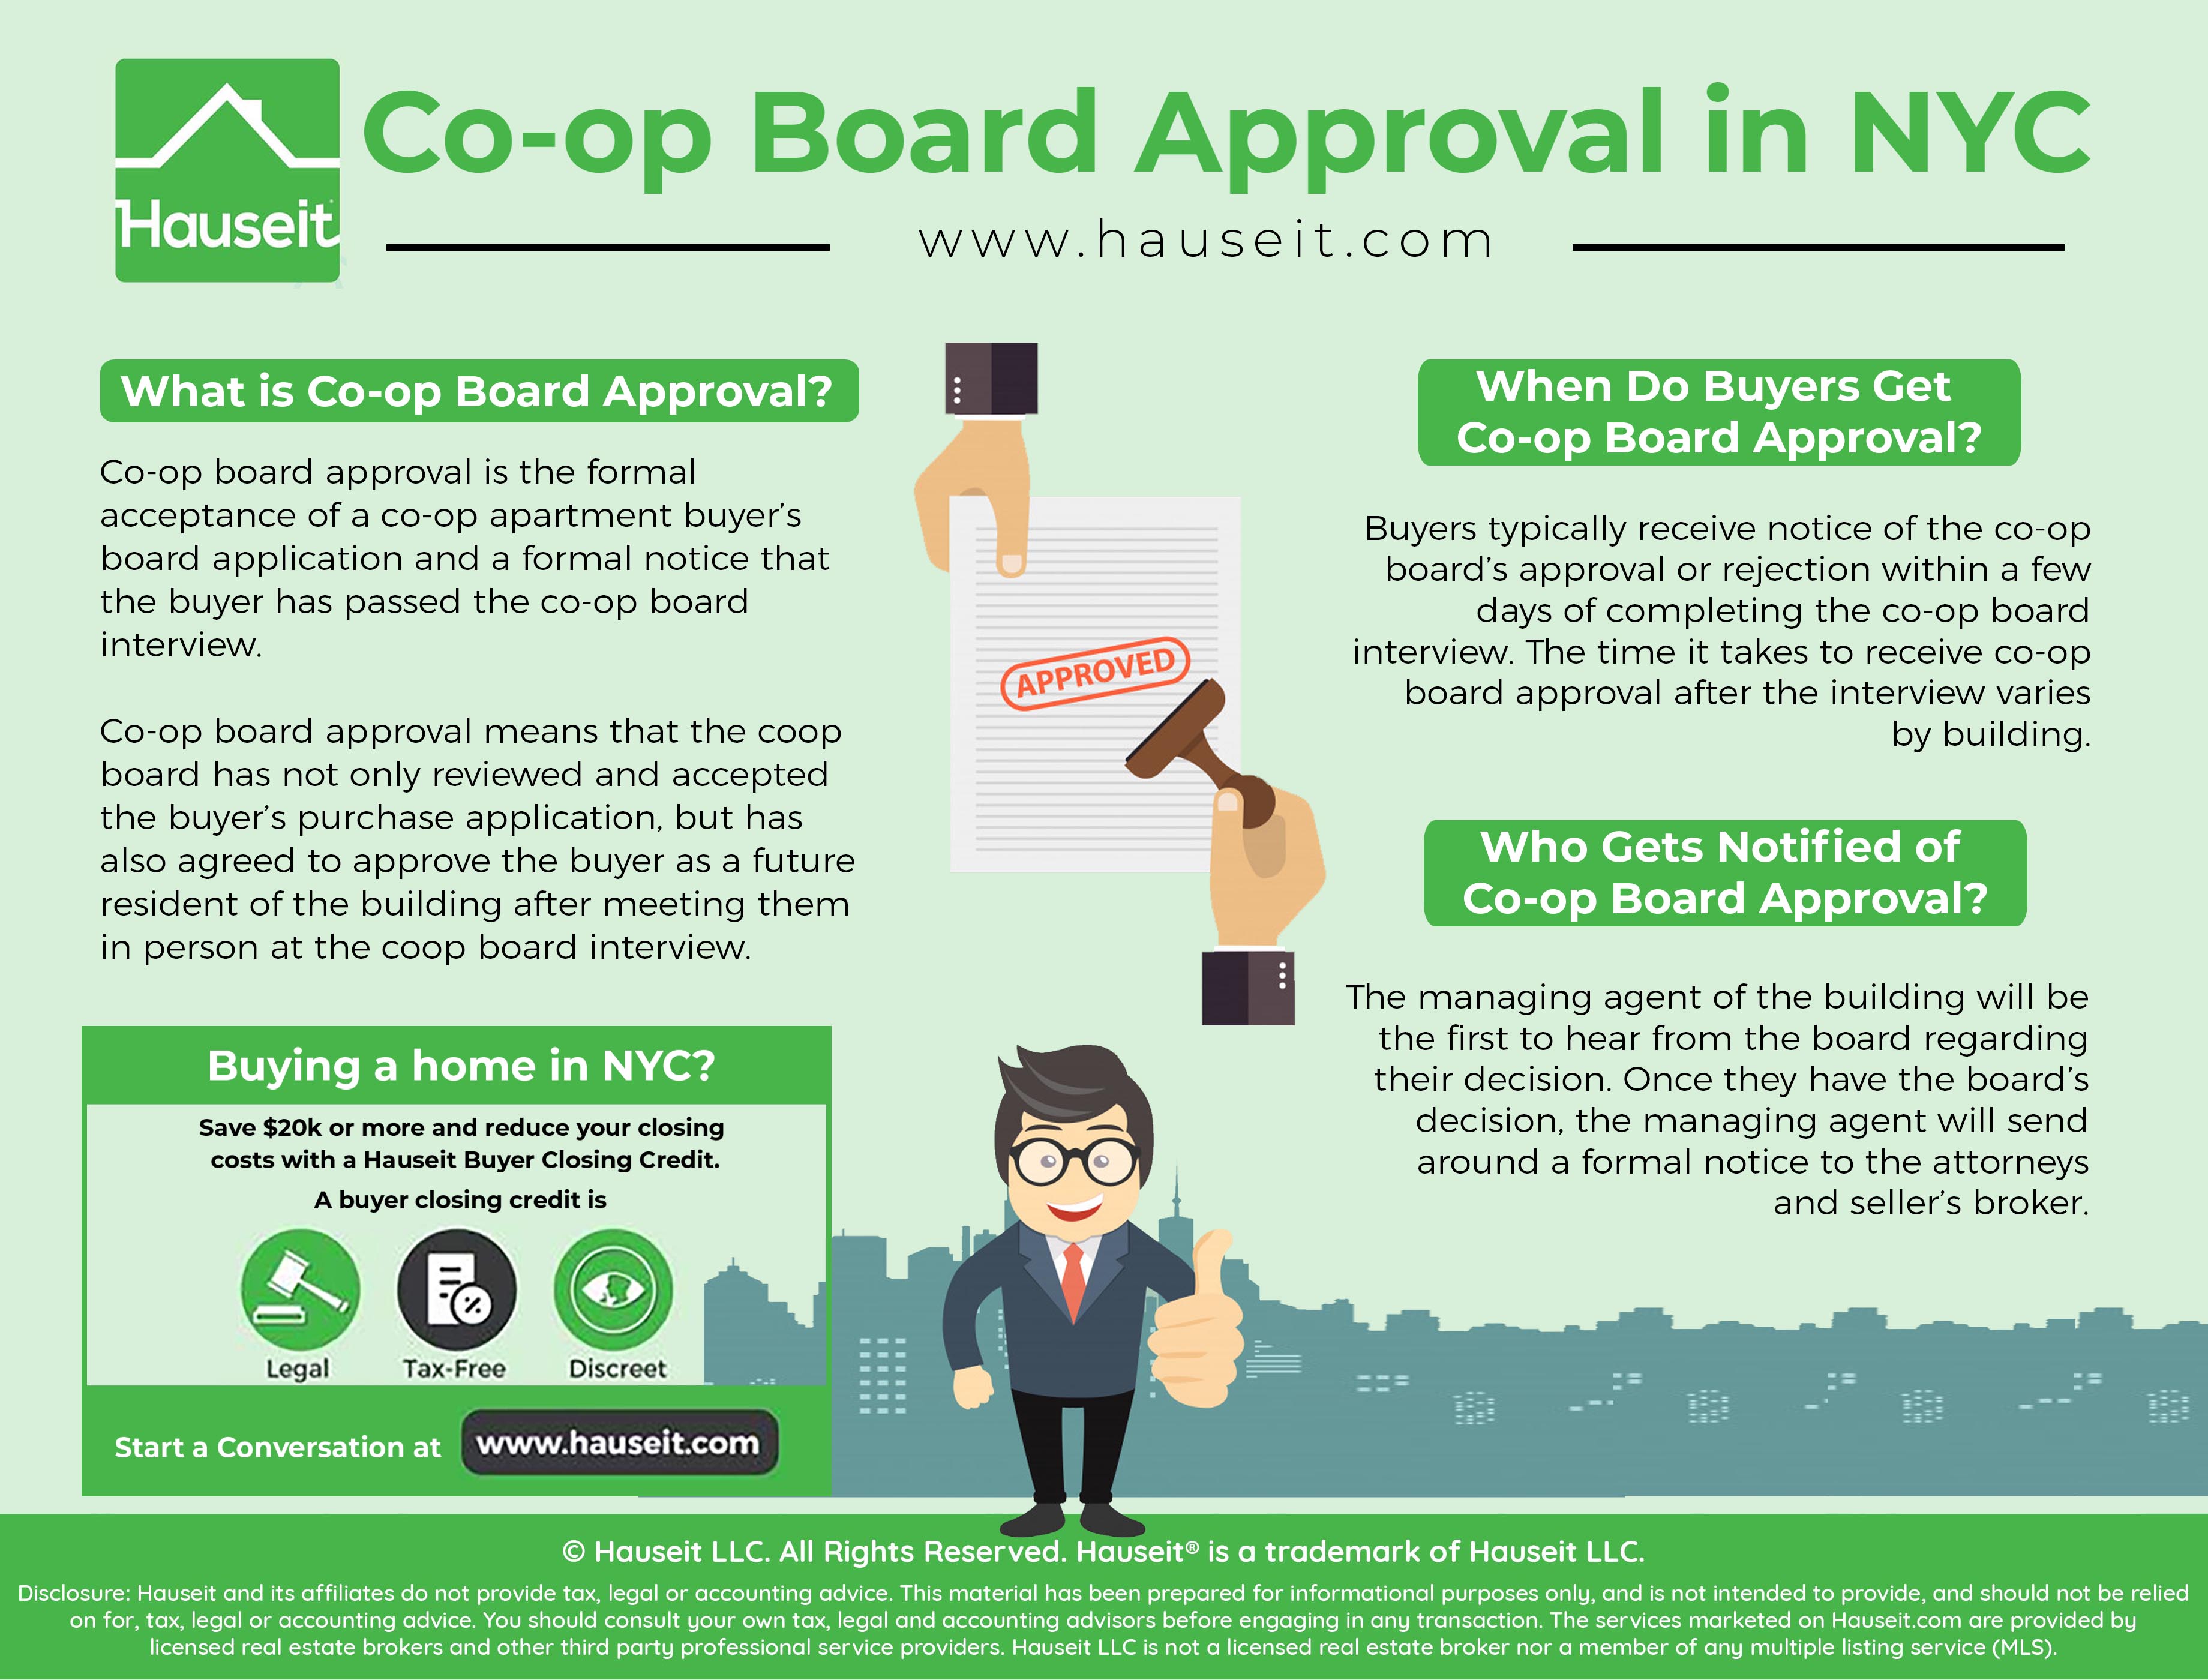 Co-op board approval is the formal acceptance of a co-op apartment buyer’s board application and a formal notice that the buyer has passed the co-op board interview.